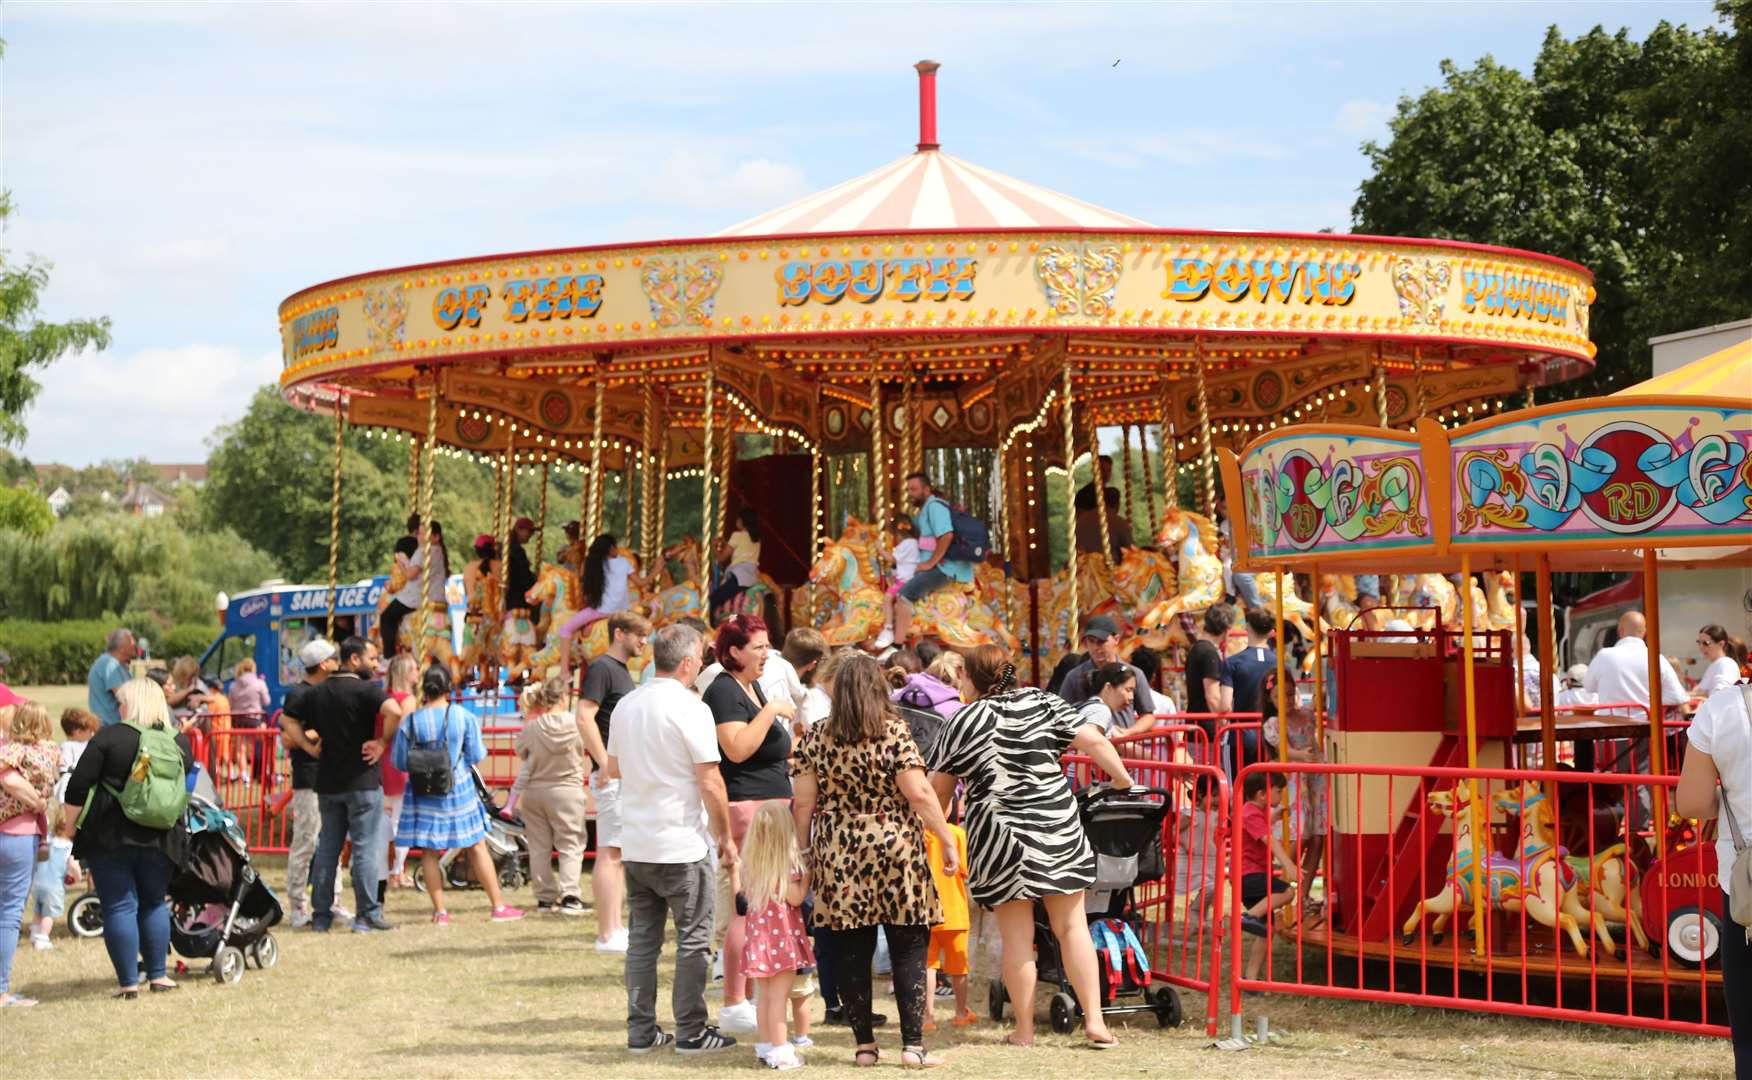 There was plenty of family entertainment at last year’s festival.